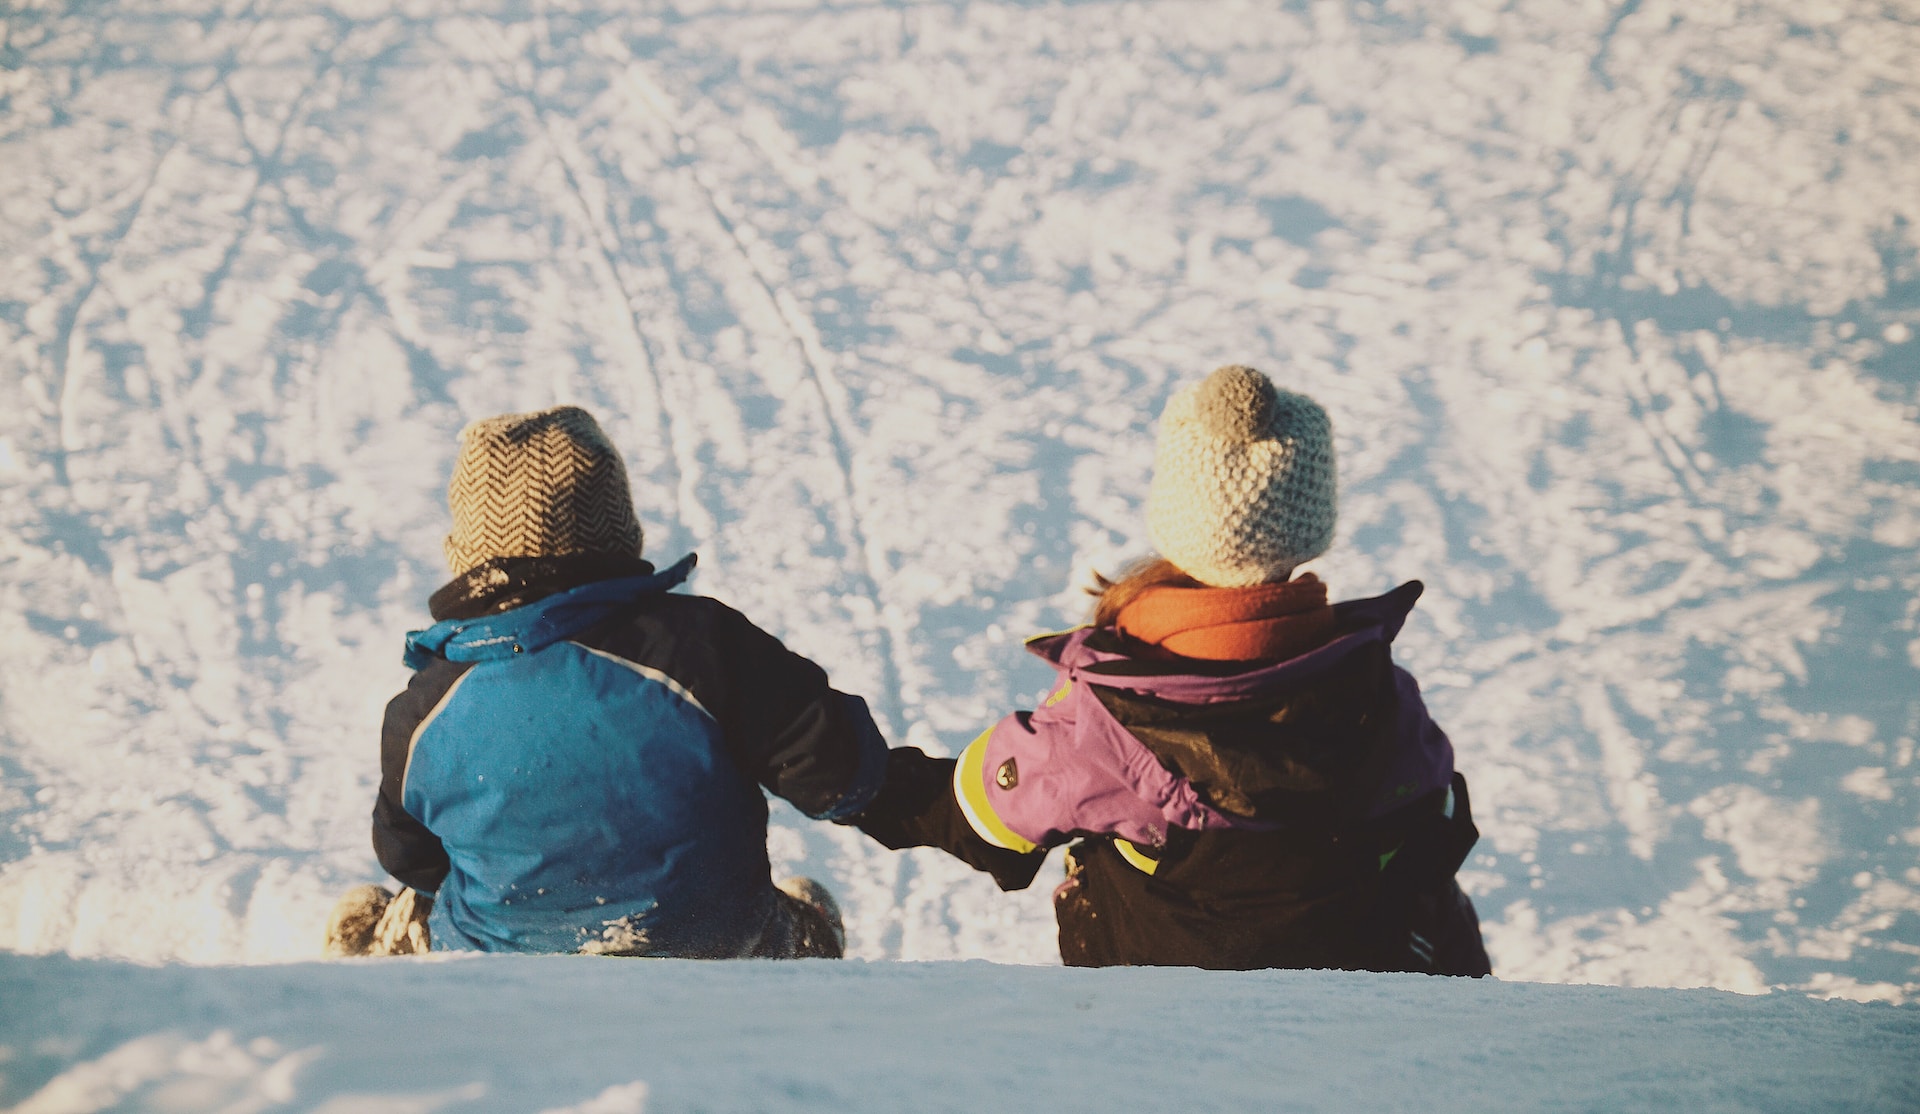 Experience fun activities when traveling to Winter Park with children